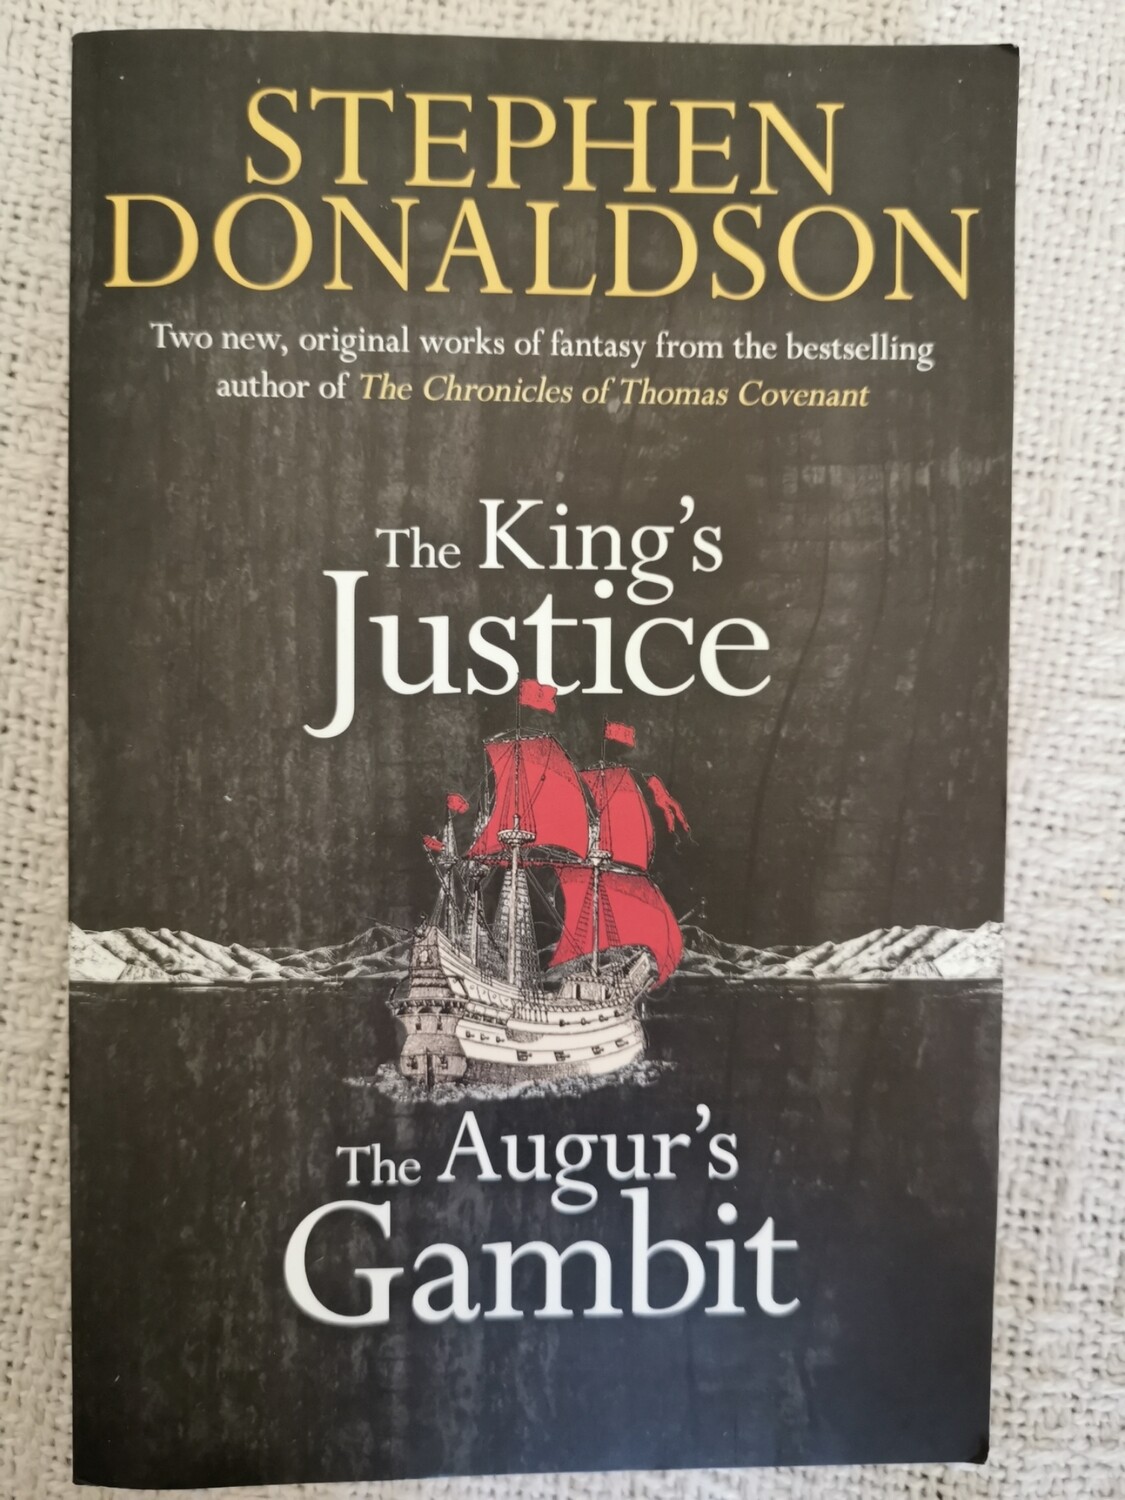 The kings justice, Stephen Donaldson